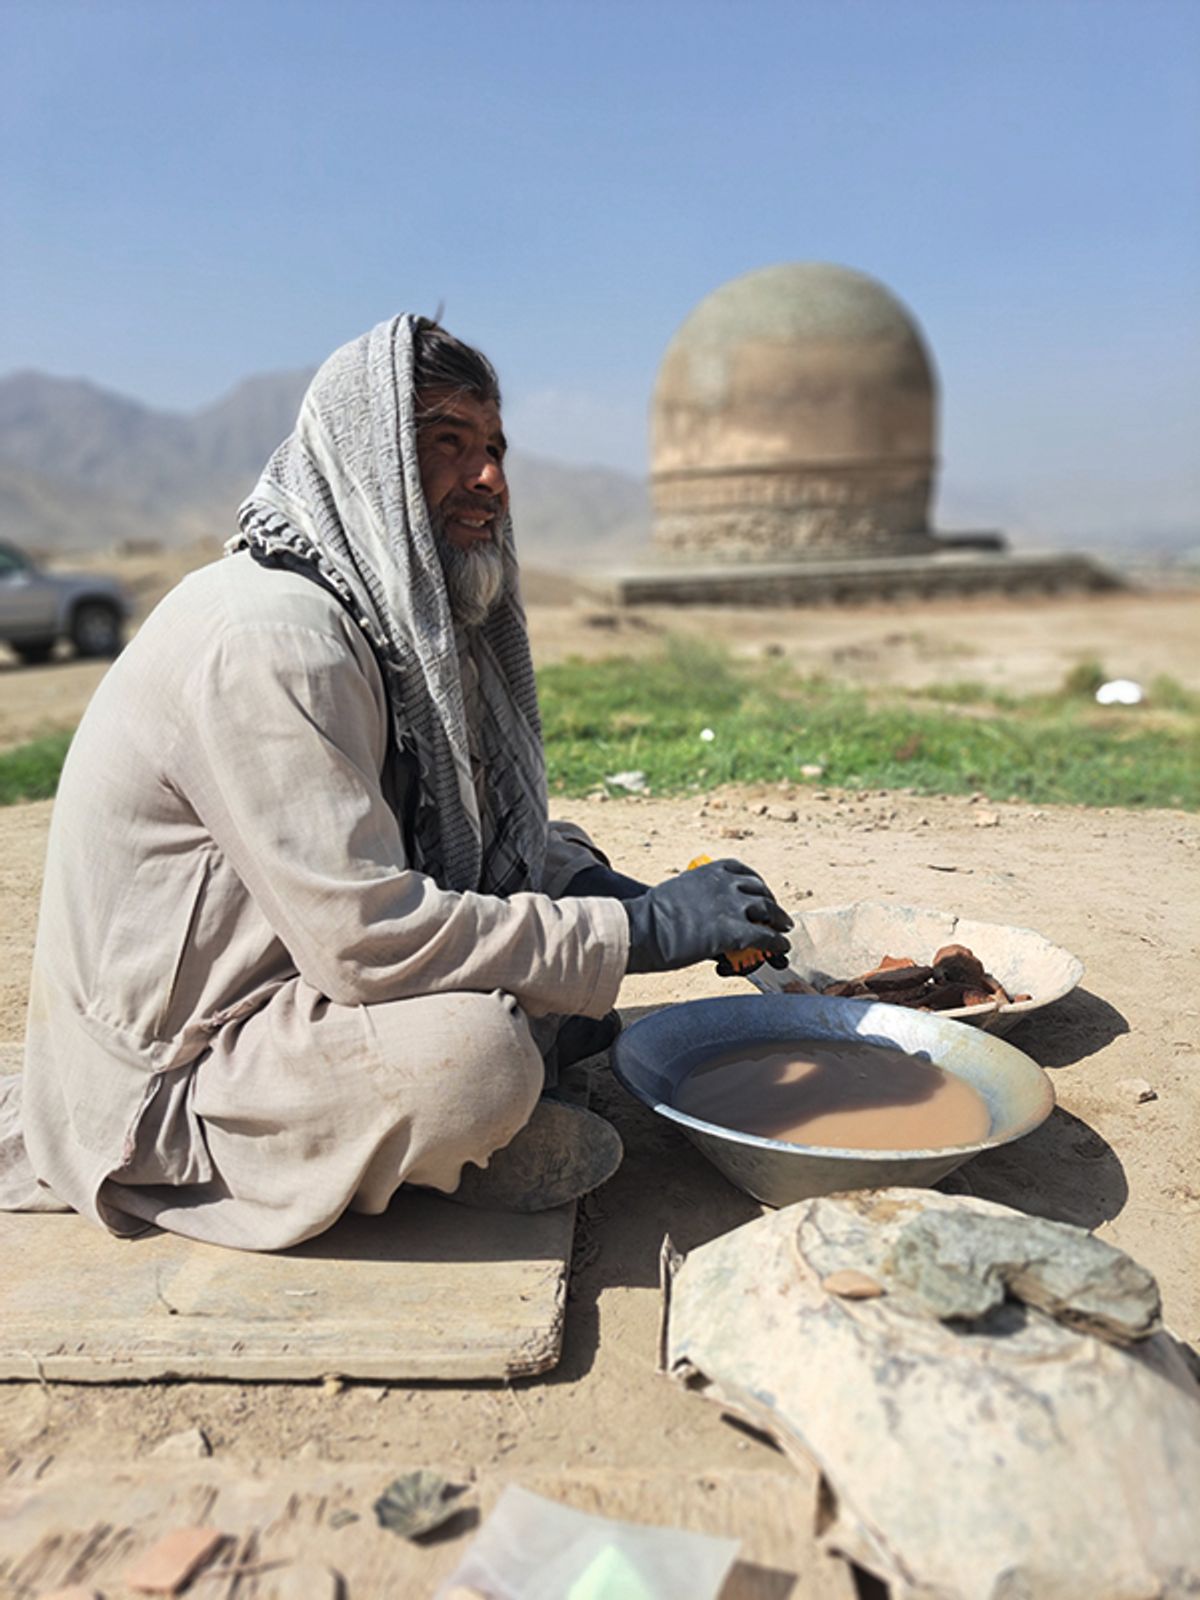 A local man in Shewaki cleans archaeological findings in front of the stupa, which is around 1,500 years old

Photo: Sarvy Geranpayeh